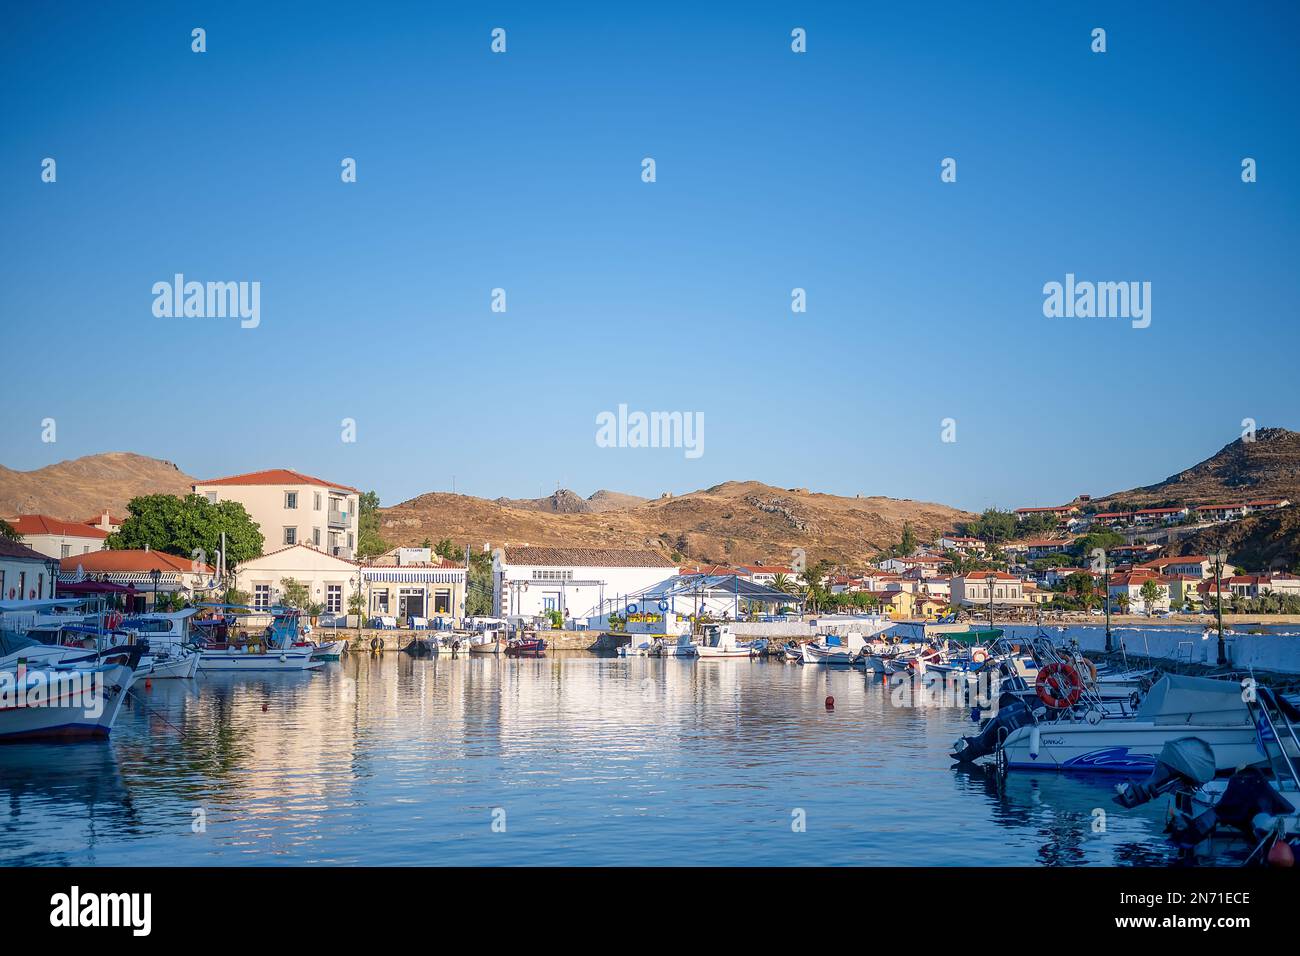 Boats moored in a harbour, Myrina, Lemnos, Greece Stock Photo